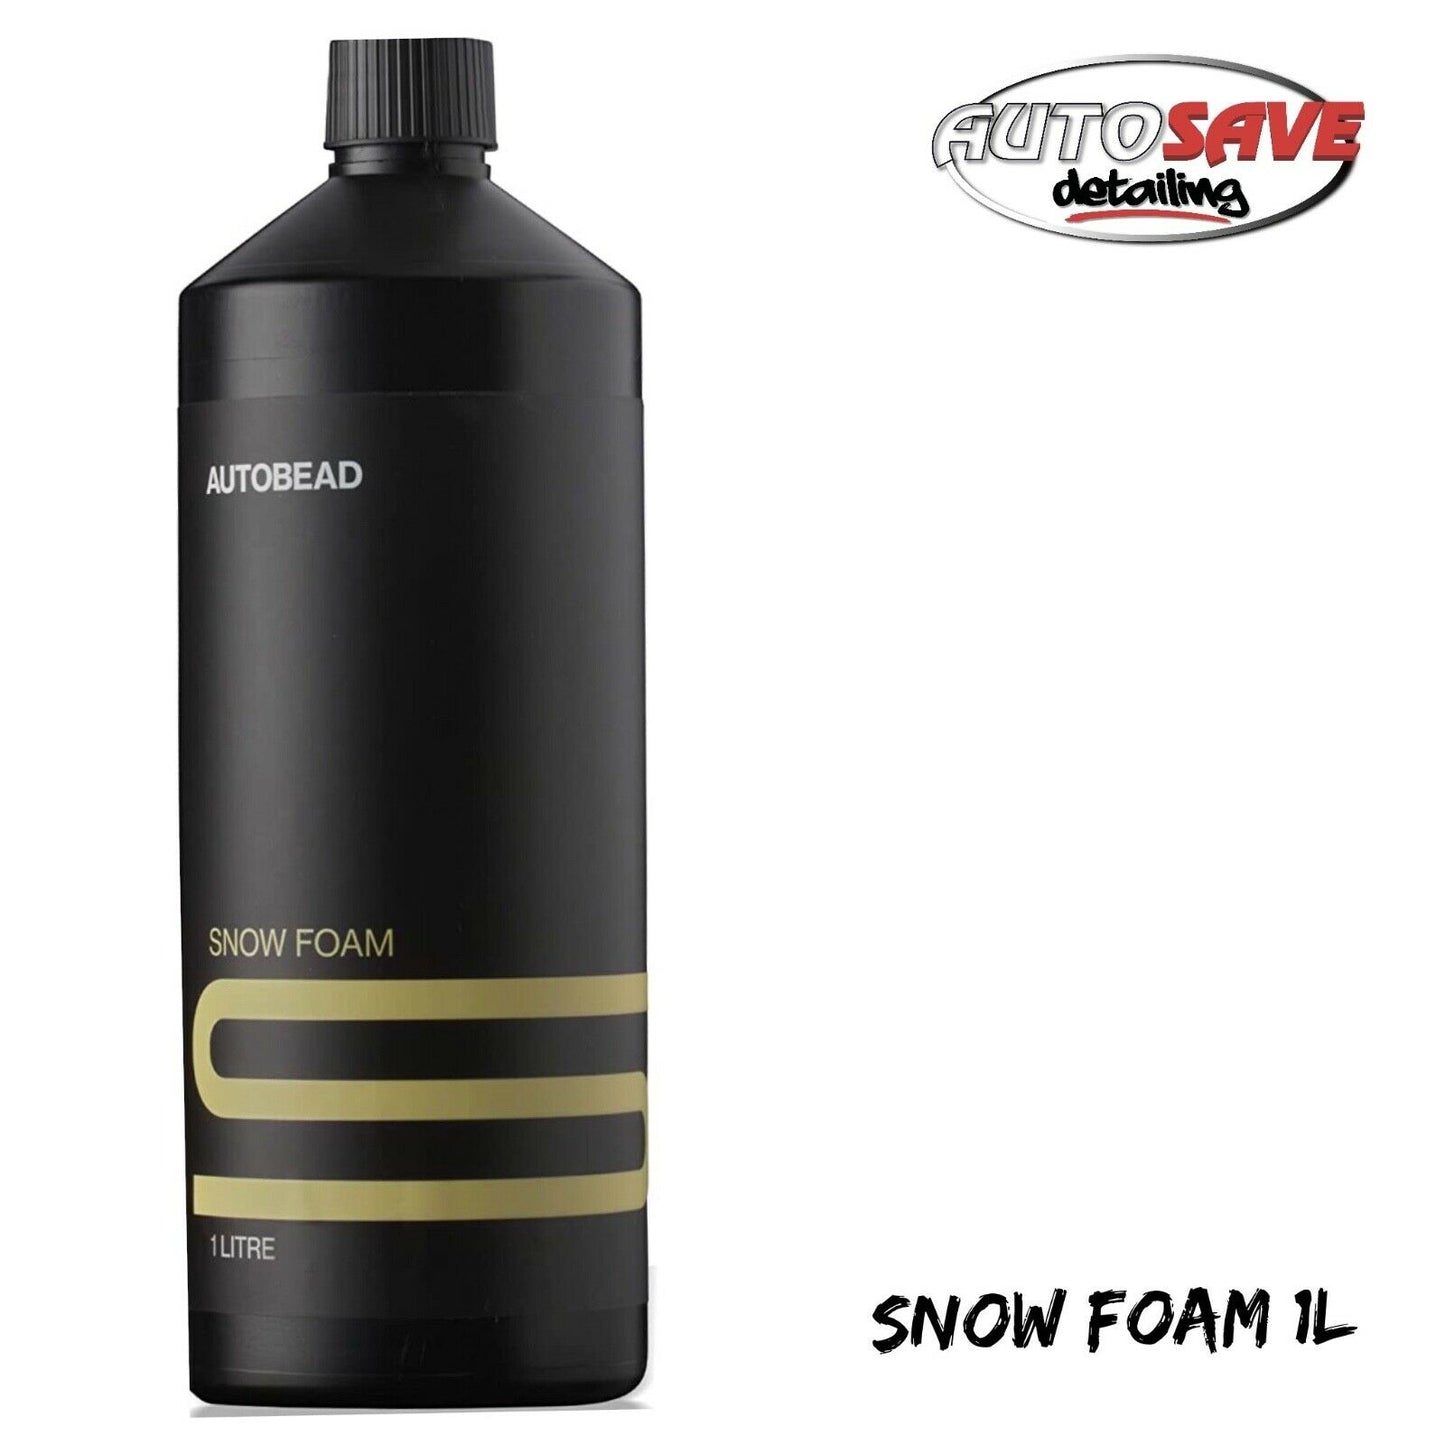 Autobead Snow Foam 1L Detailers concentrated car pre wash